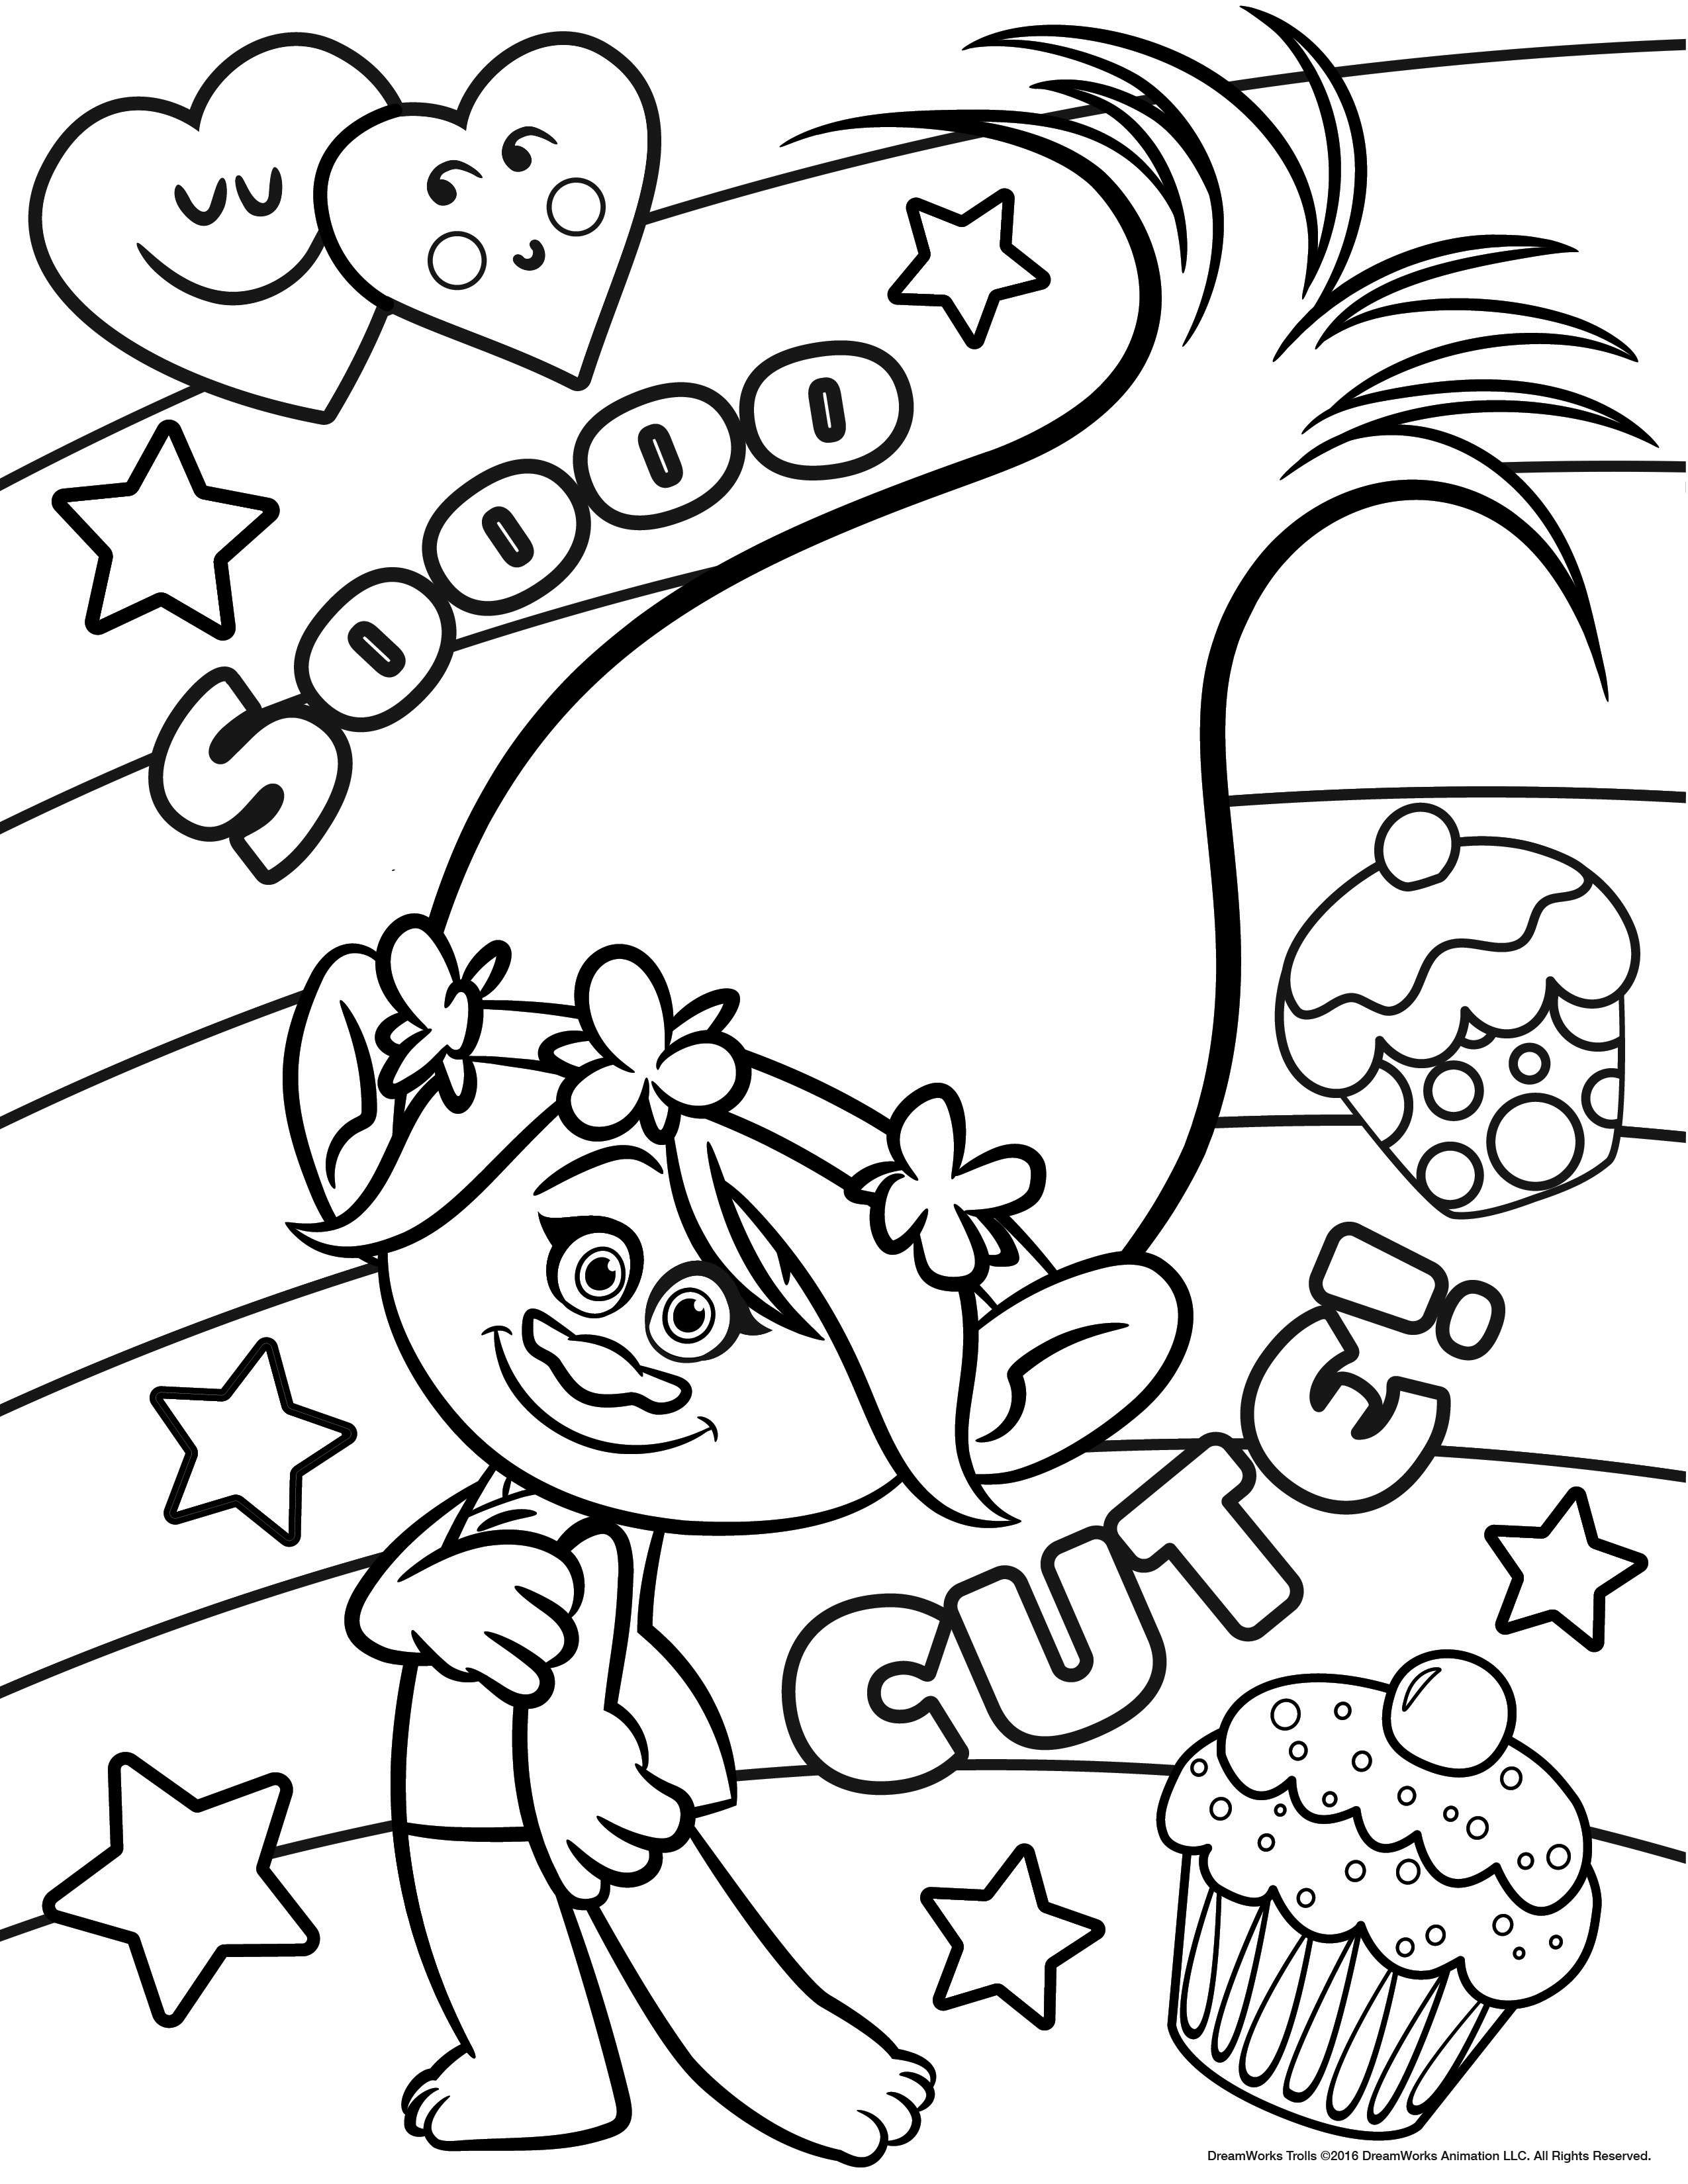 poppy-so-cute-trolls-kids-coloring-pages